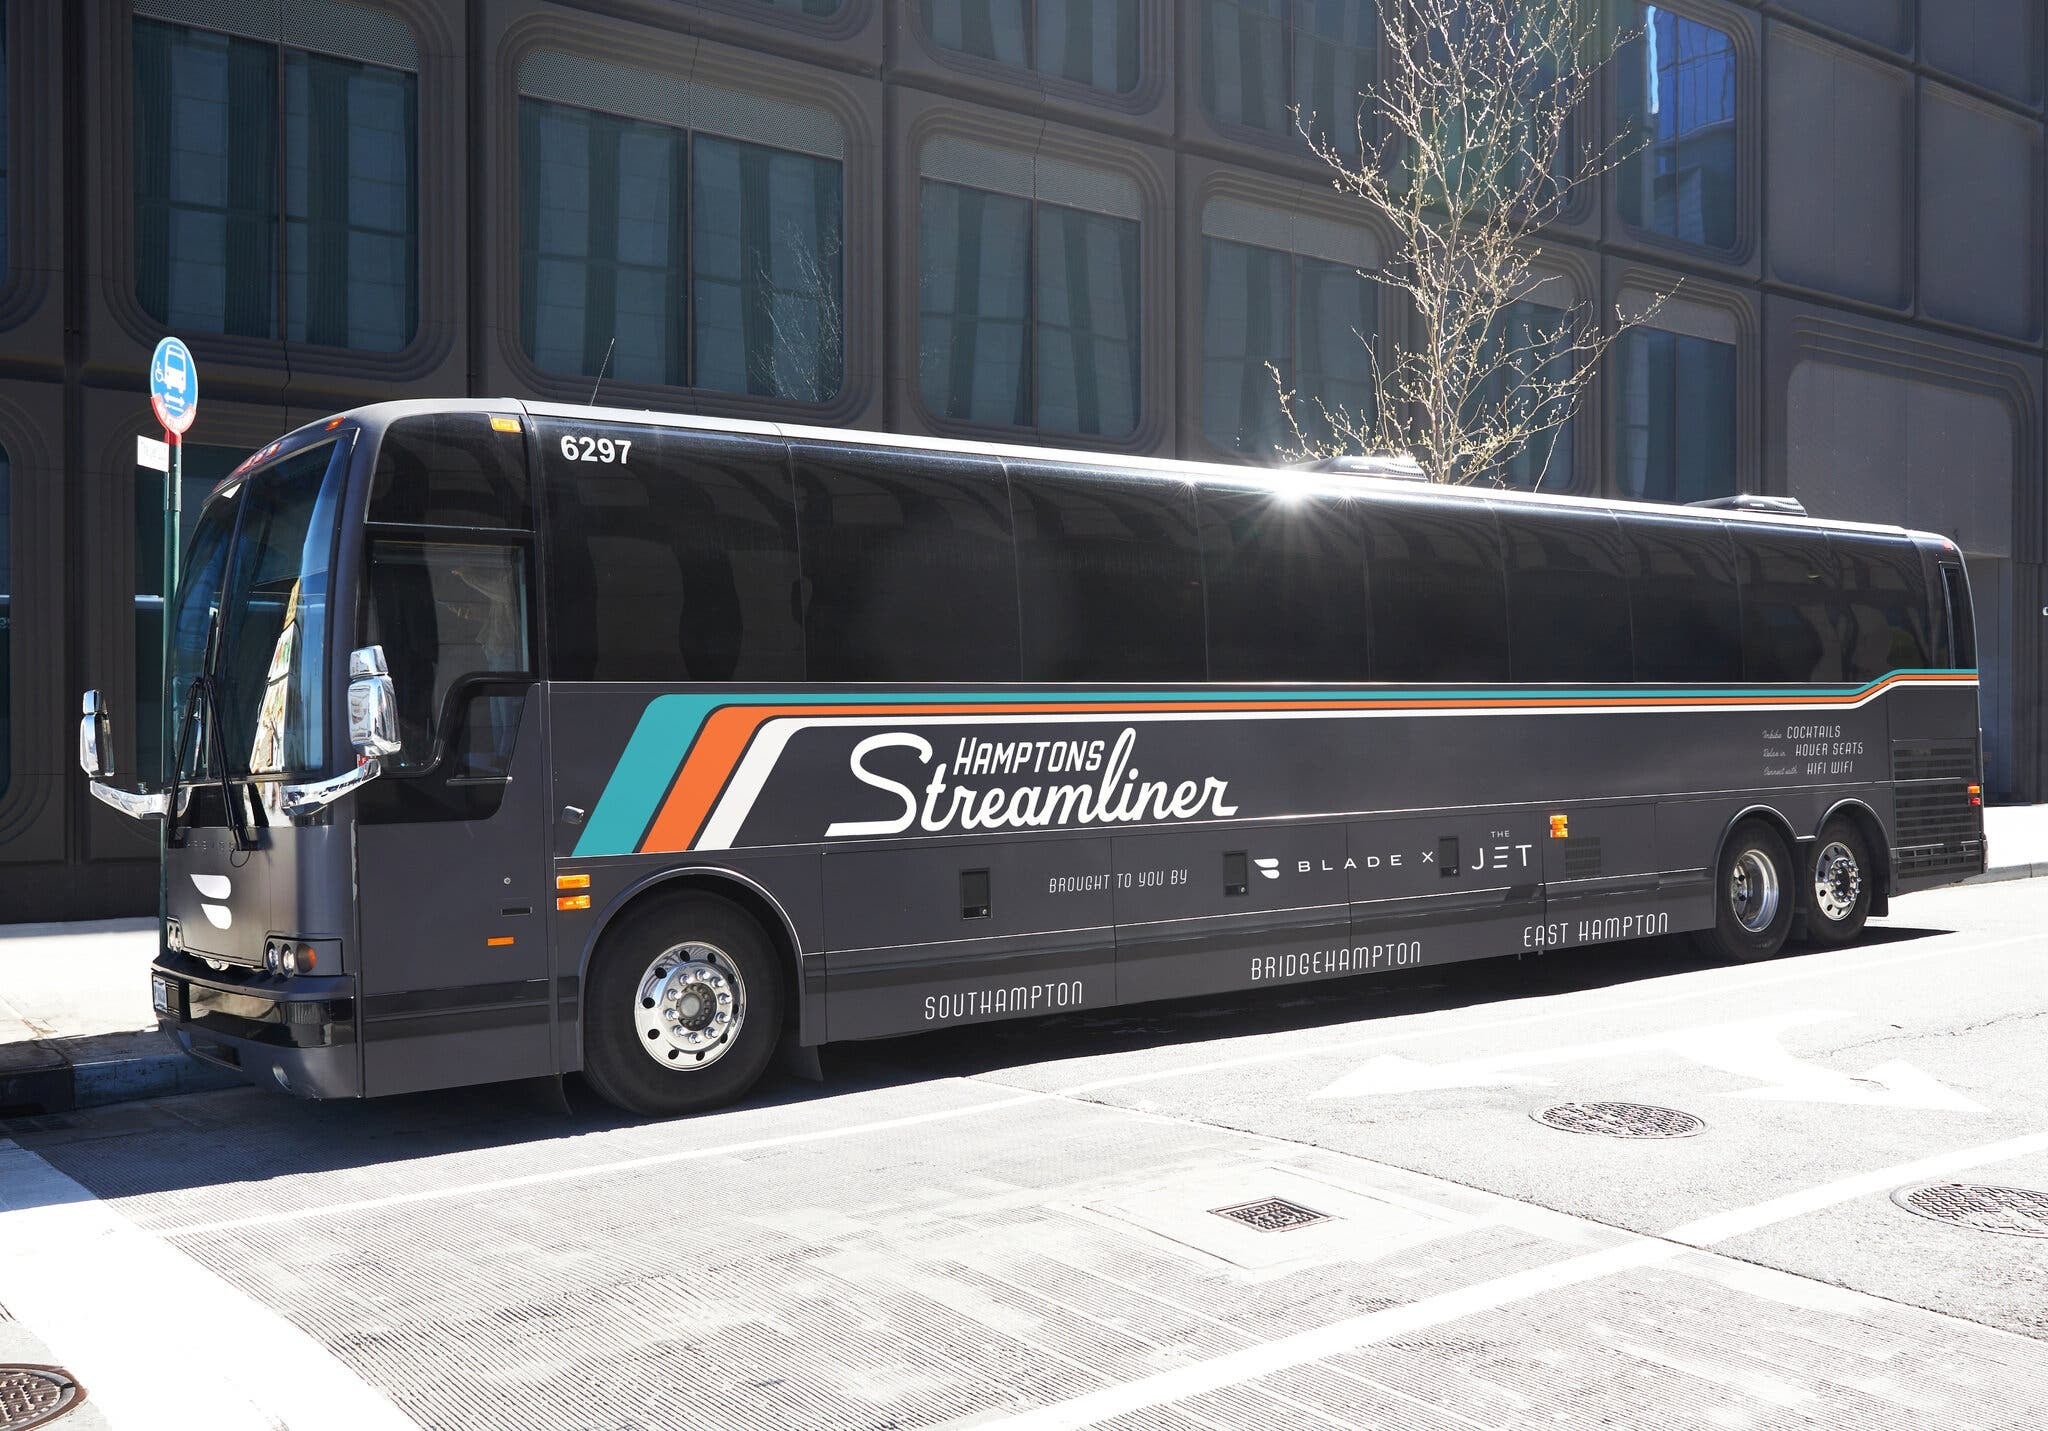 Two Jet coaches will run as Hamptons Streamliners from May